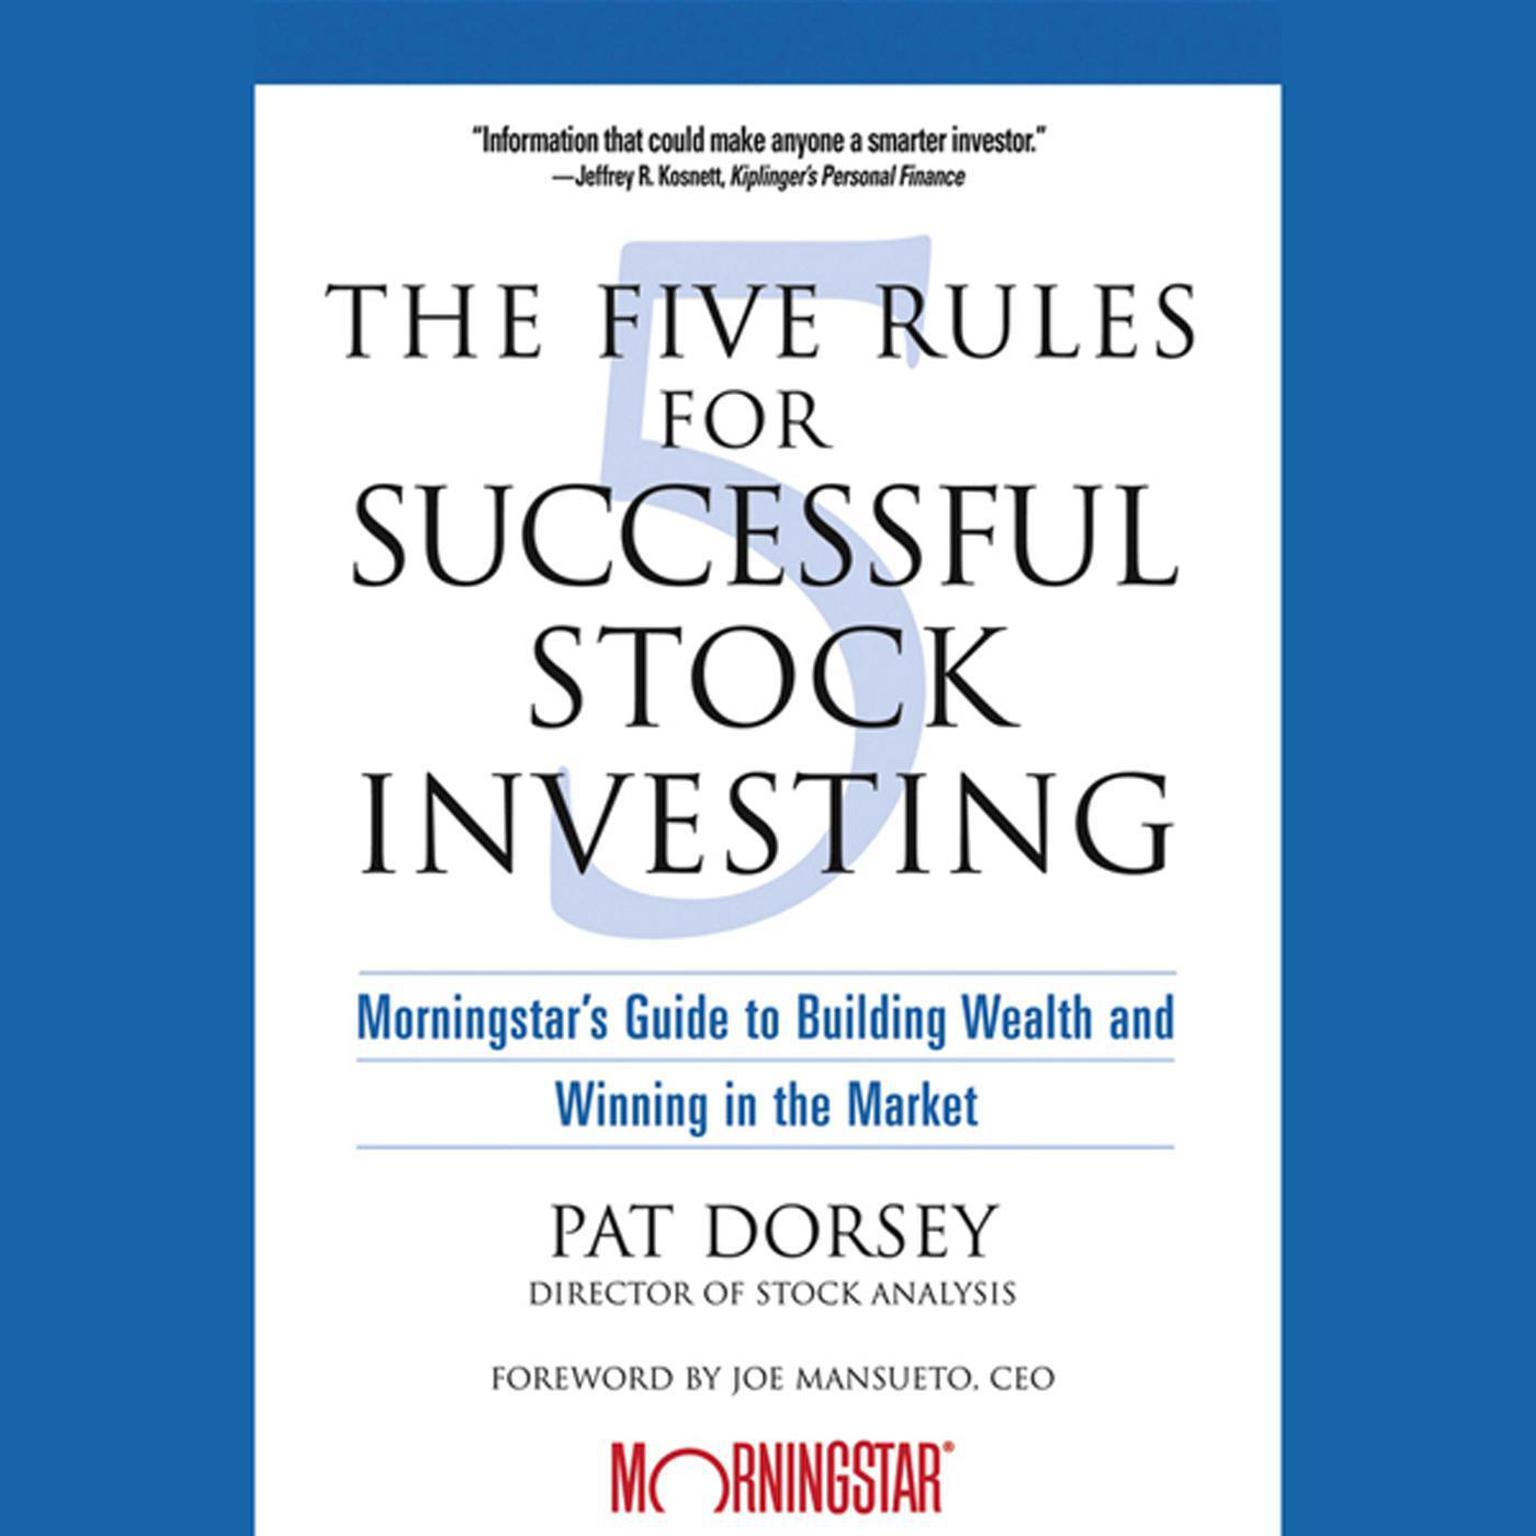 The Five Rules for Successful Stock Investing: Morningstars Guide to Building Wealth and Winning in the Market Audiobook, by Pat Dorsey